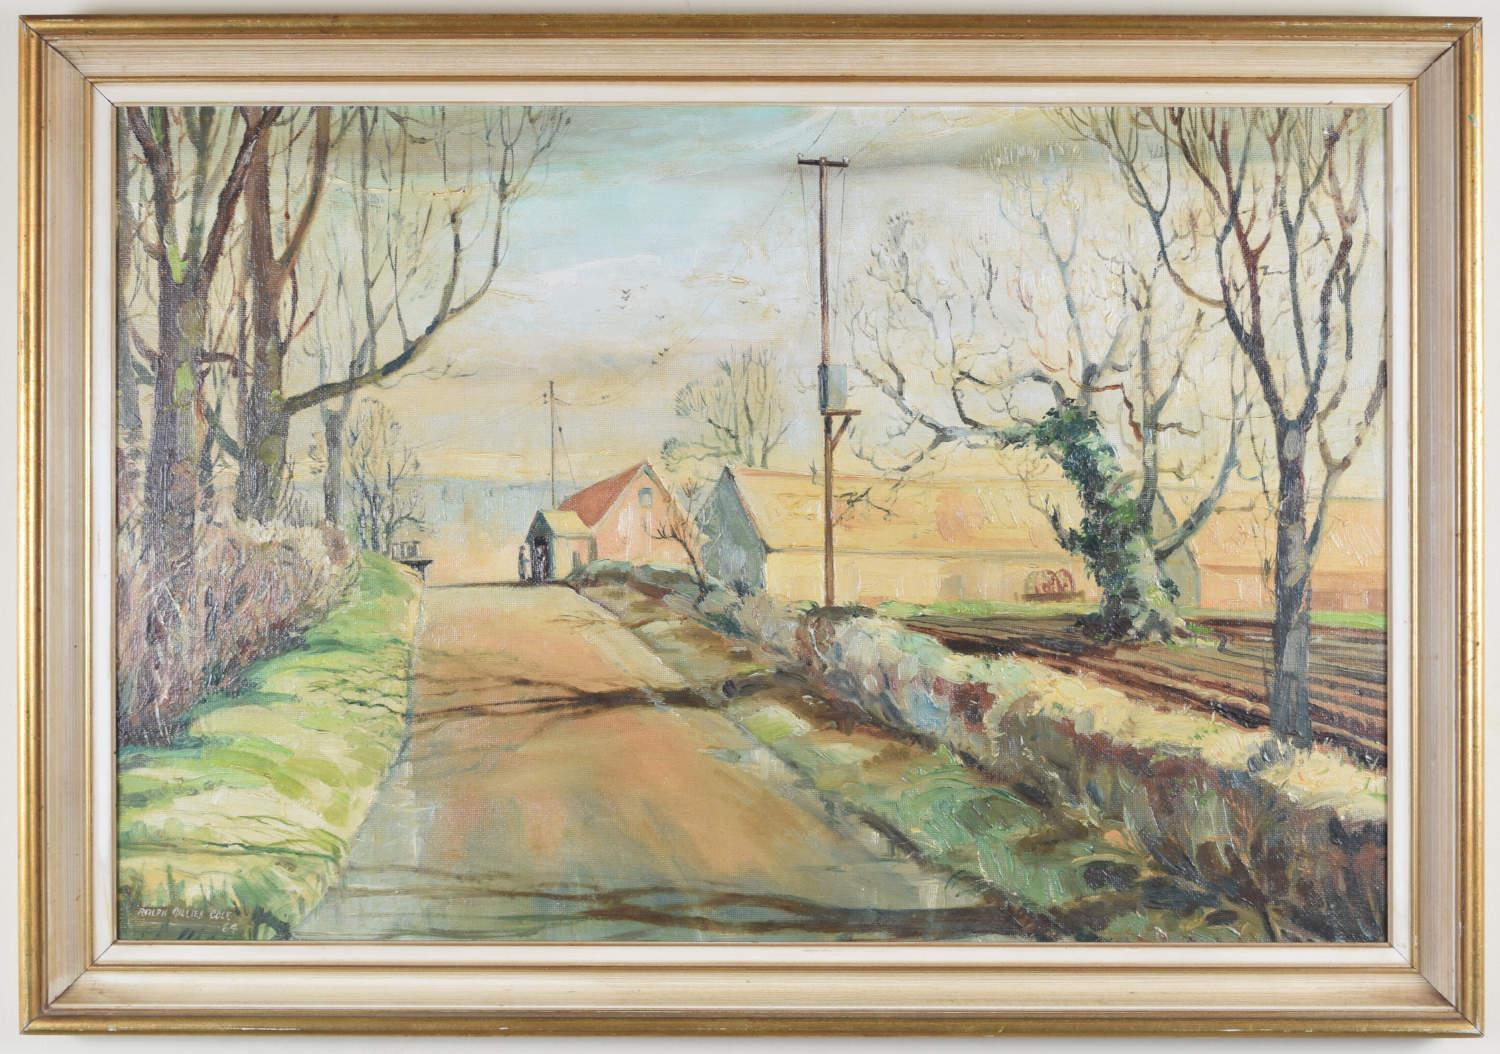 To see our other Modern British Art, scroll down to "More from this Seller" and below it click on "See all from this Seller" - or send us a message if you cannot find the artist you want.

Ralph Gillies Cole (1915-1994)
Farmhouse in English